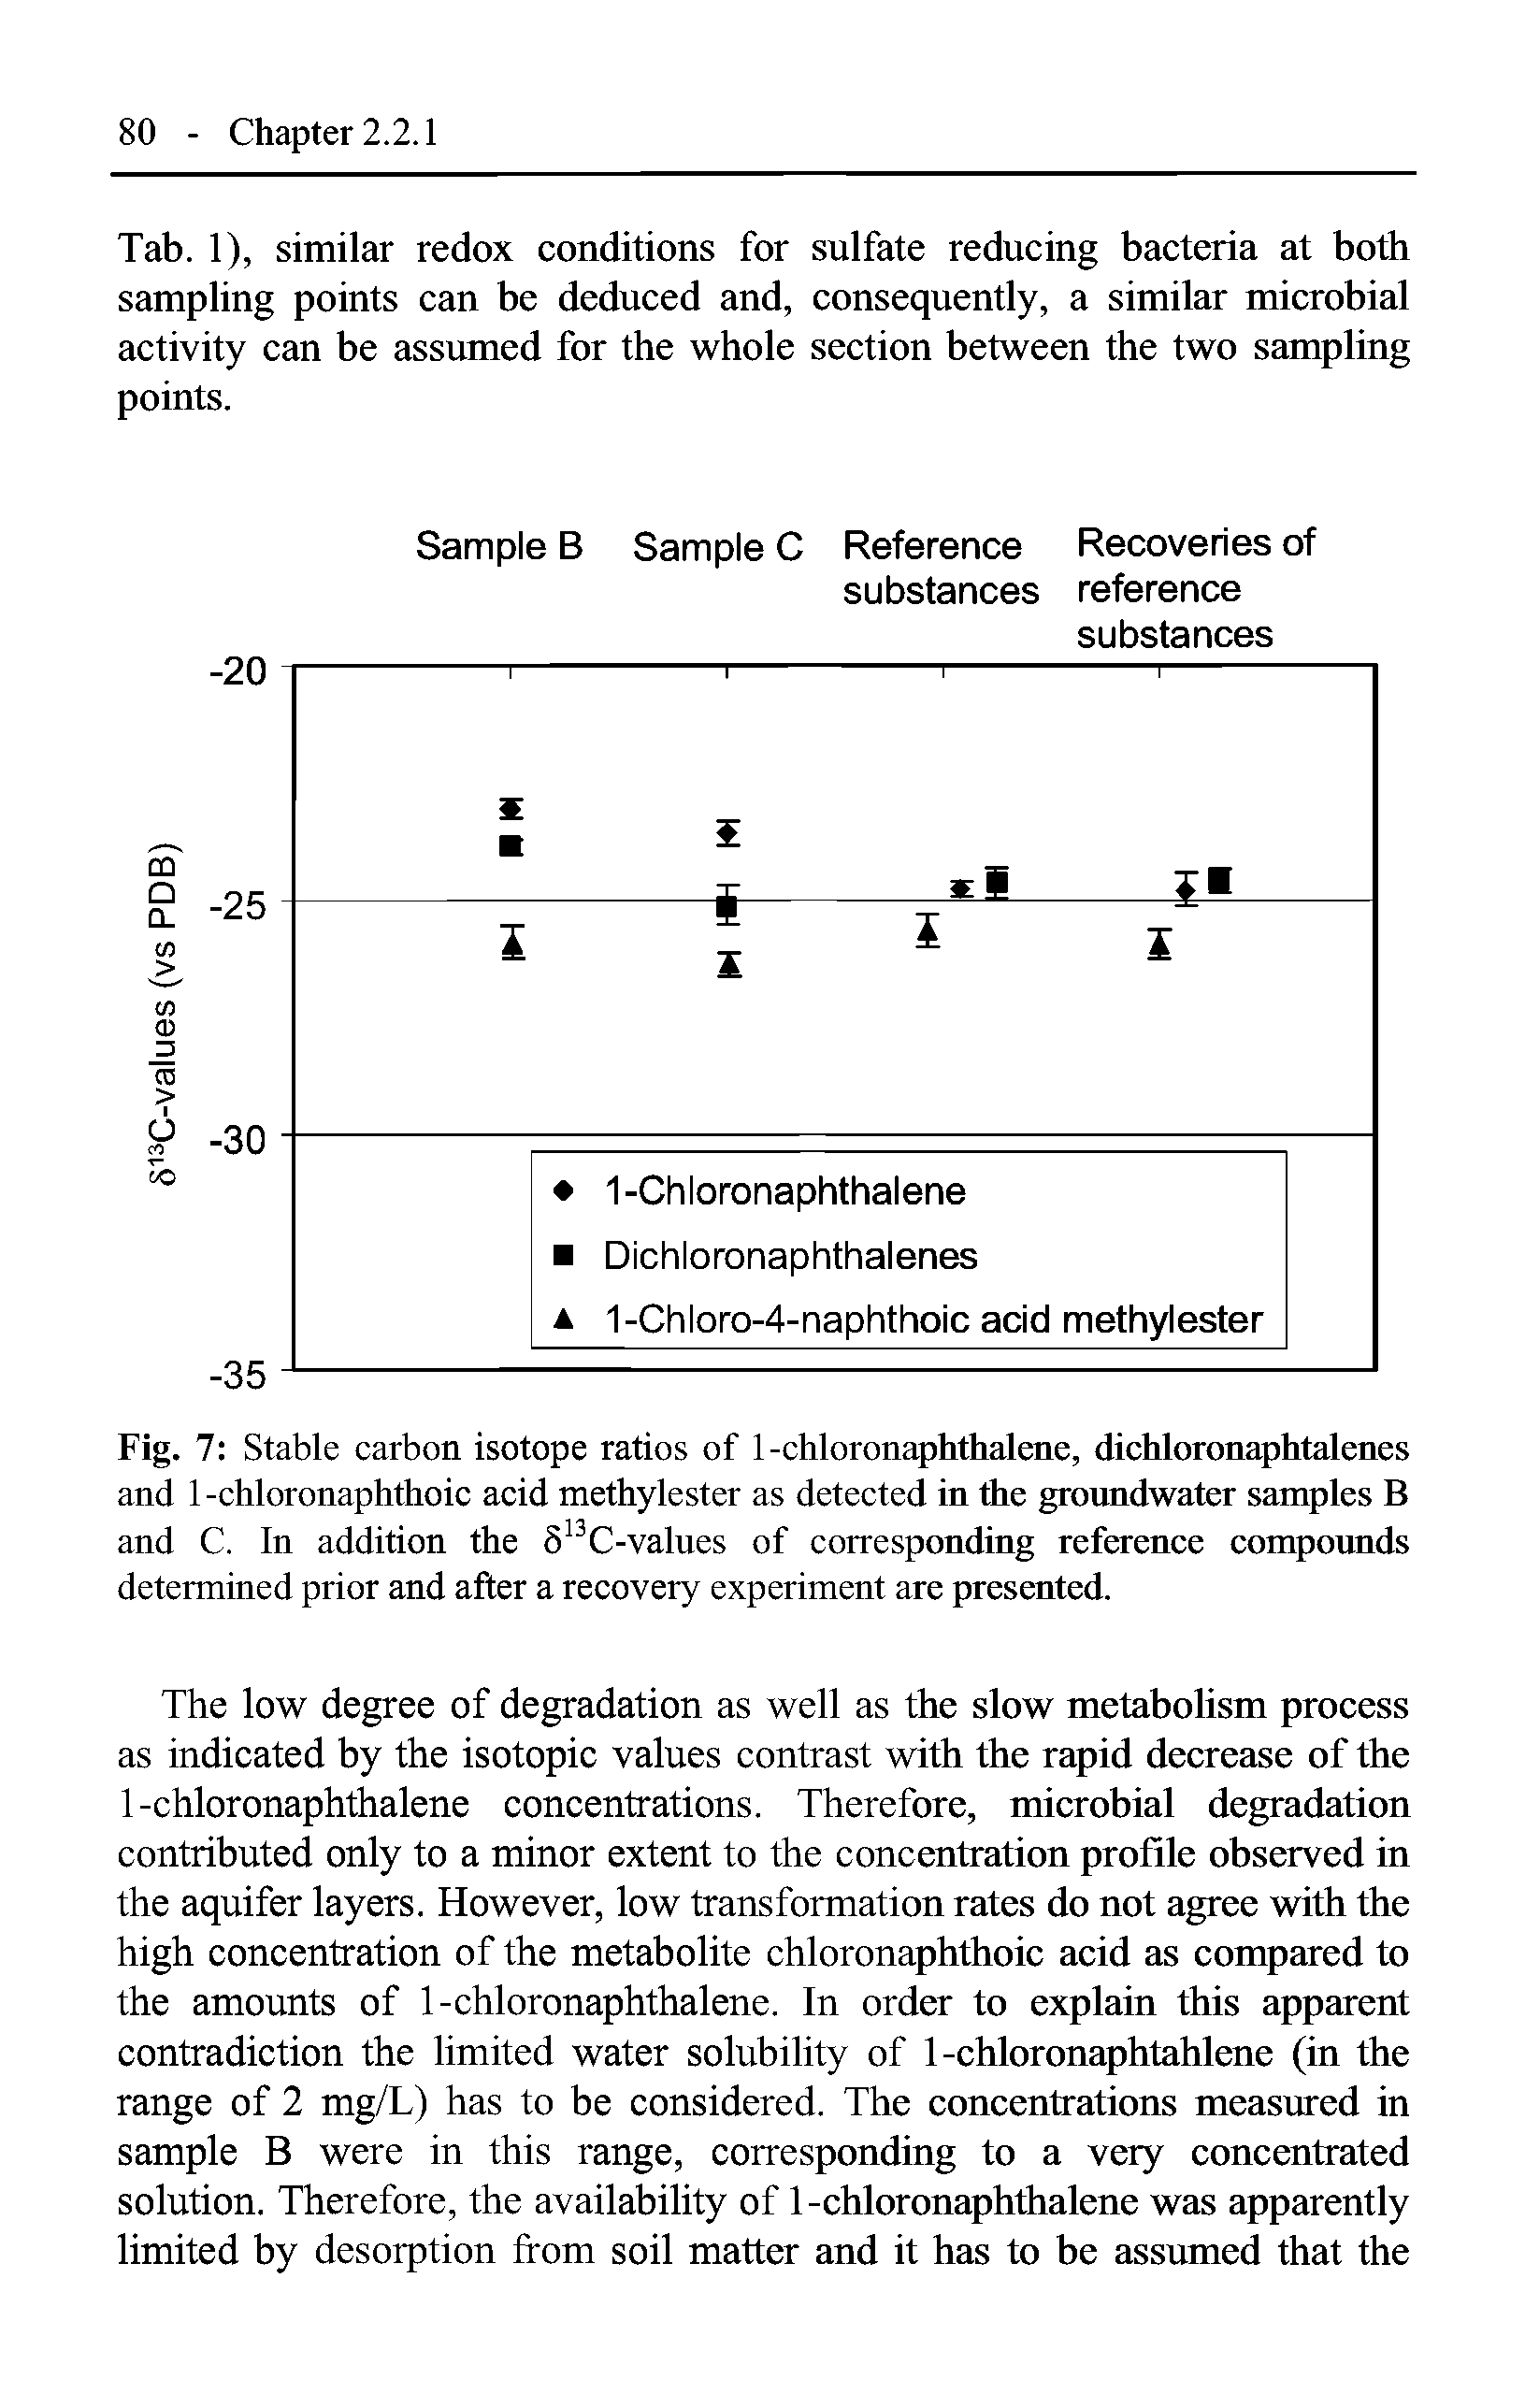 Fig. 7 Stable carbon isotope ratios of 1-chloronaphthalene, dichloronaphtalenes and 1-chloronaphthoic acid methylester as detected in the groundwater samples B and C. In addition the S13C-values of corresponding reference compounds determined prior and after a recovery experiment are presented.